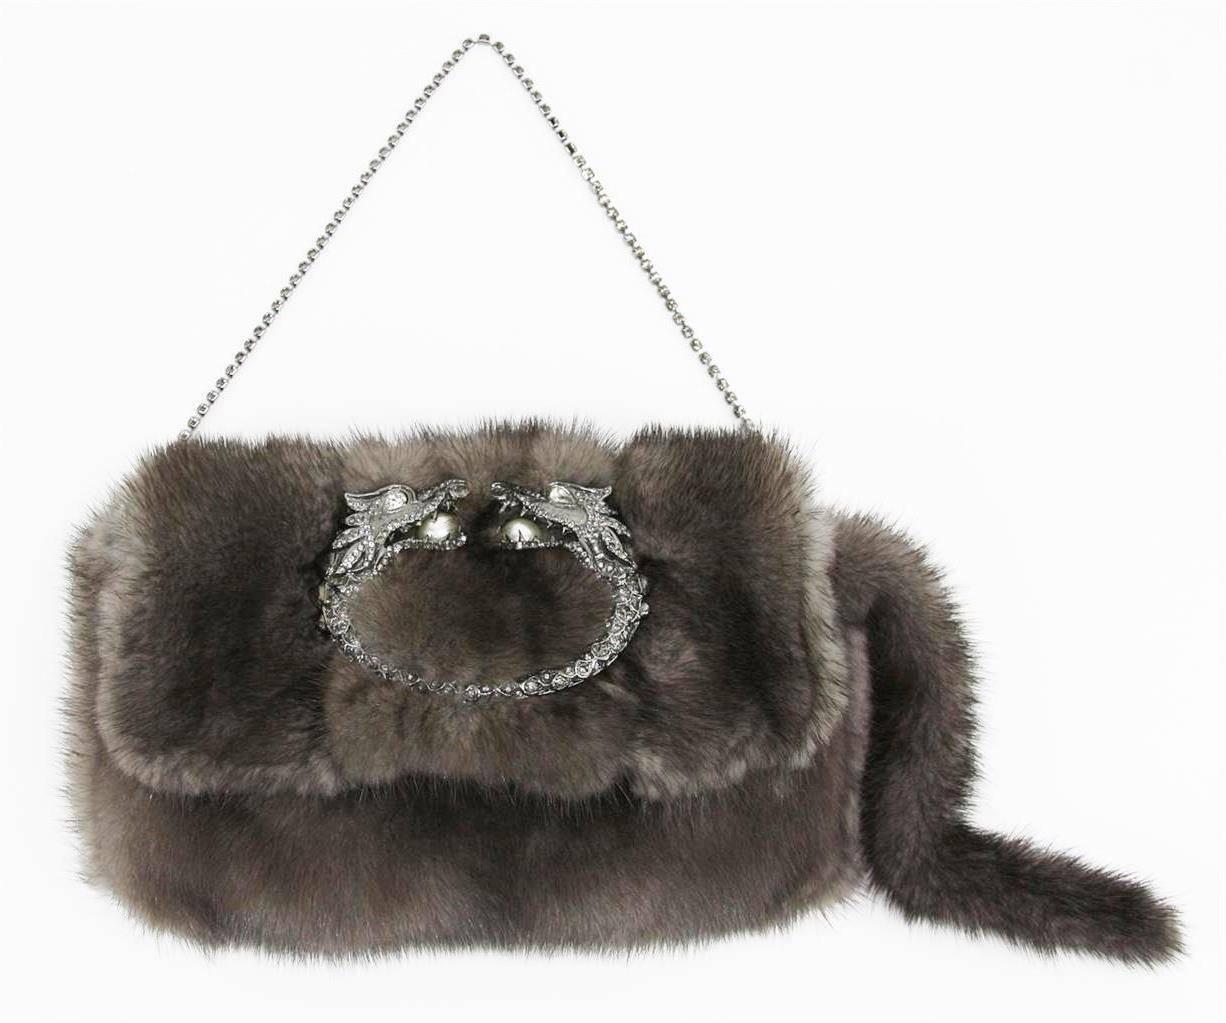 EXTREMELY RARE

GUCCI BY TOM FORD

GORGEOUS MINK FUR EVENING BAG

WITH STUNNING JEWELED DRAGON DETAIL

DETAILS: 
A GUCCI signature piece that will last you for many years
From one of GUCCI's most stunning collections by Tom Ford
Very rare